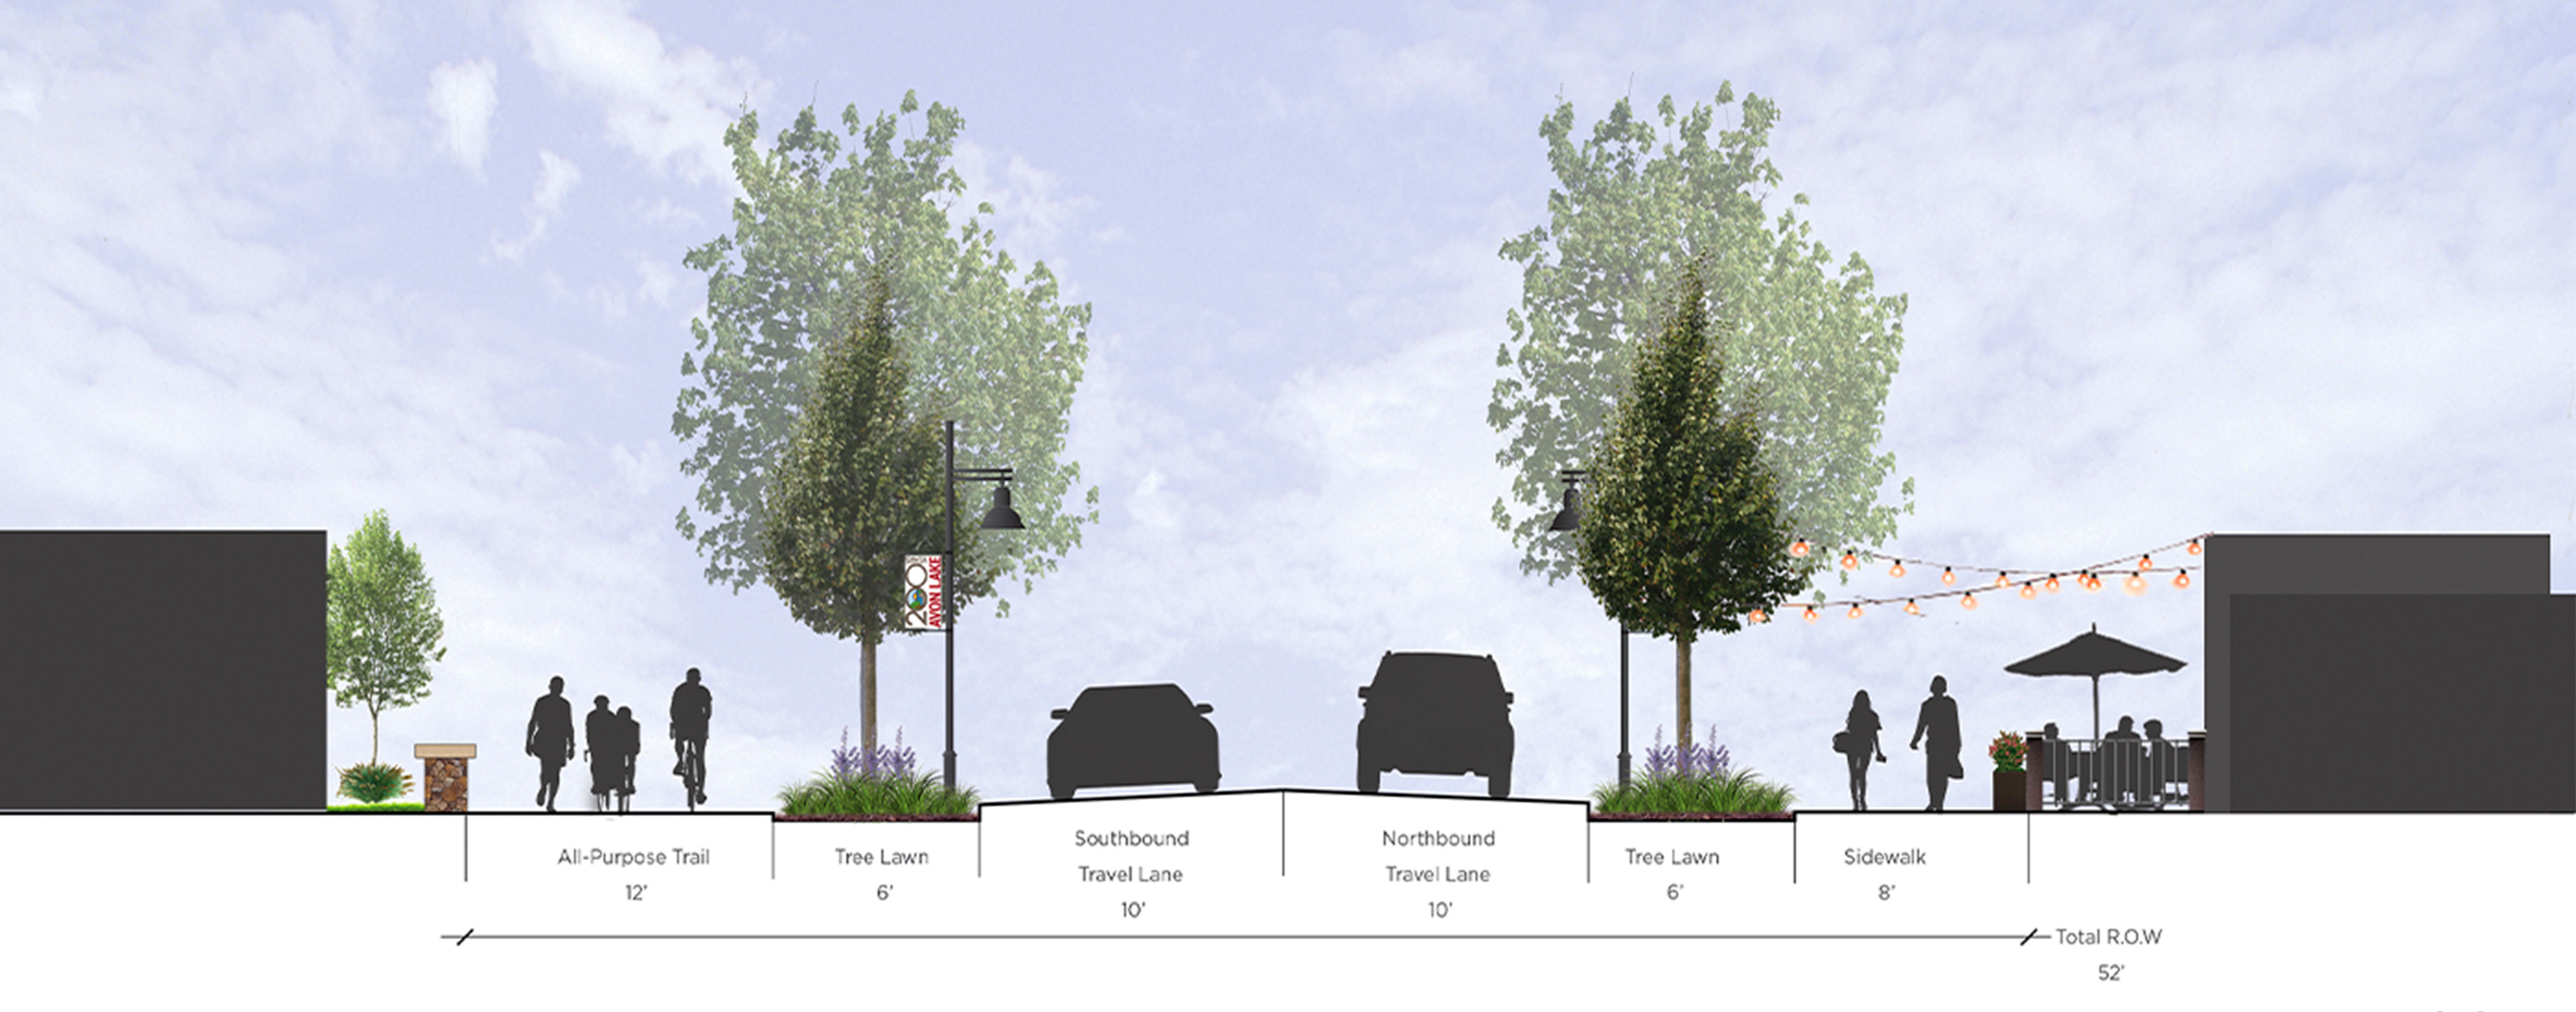 Proposed updates to Lear Street in the City of Avon Lake, Ohio.